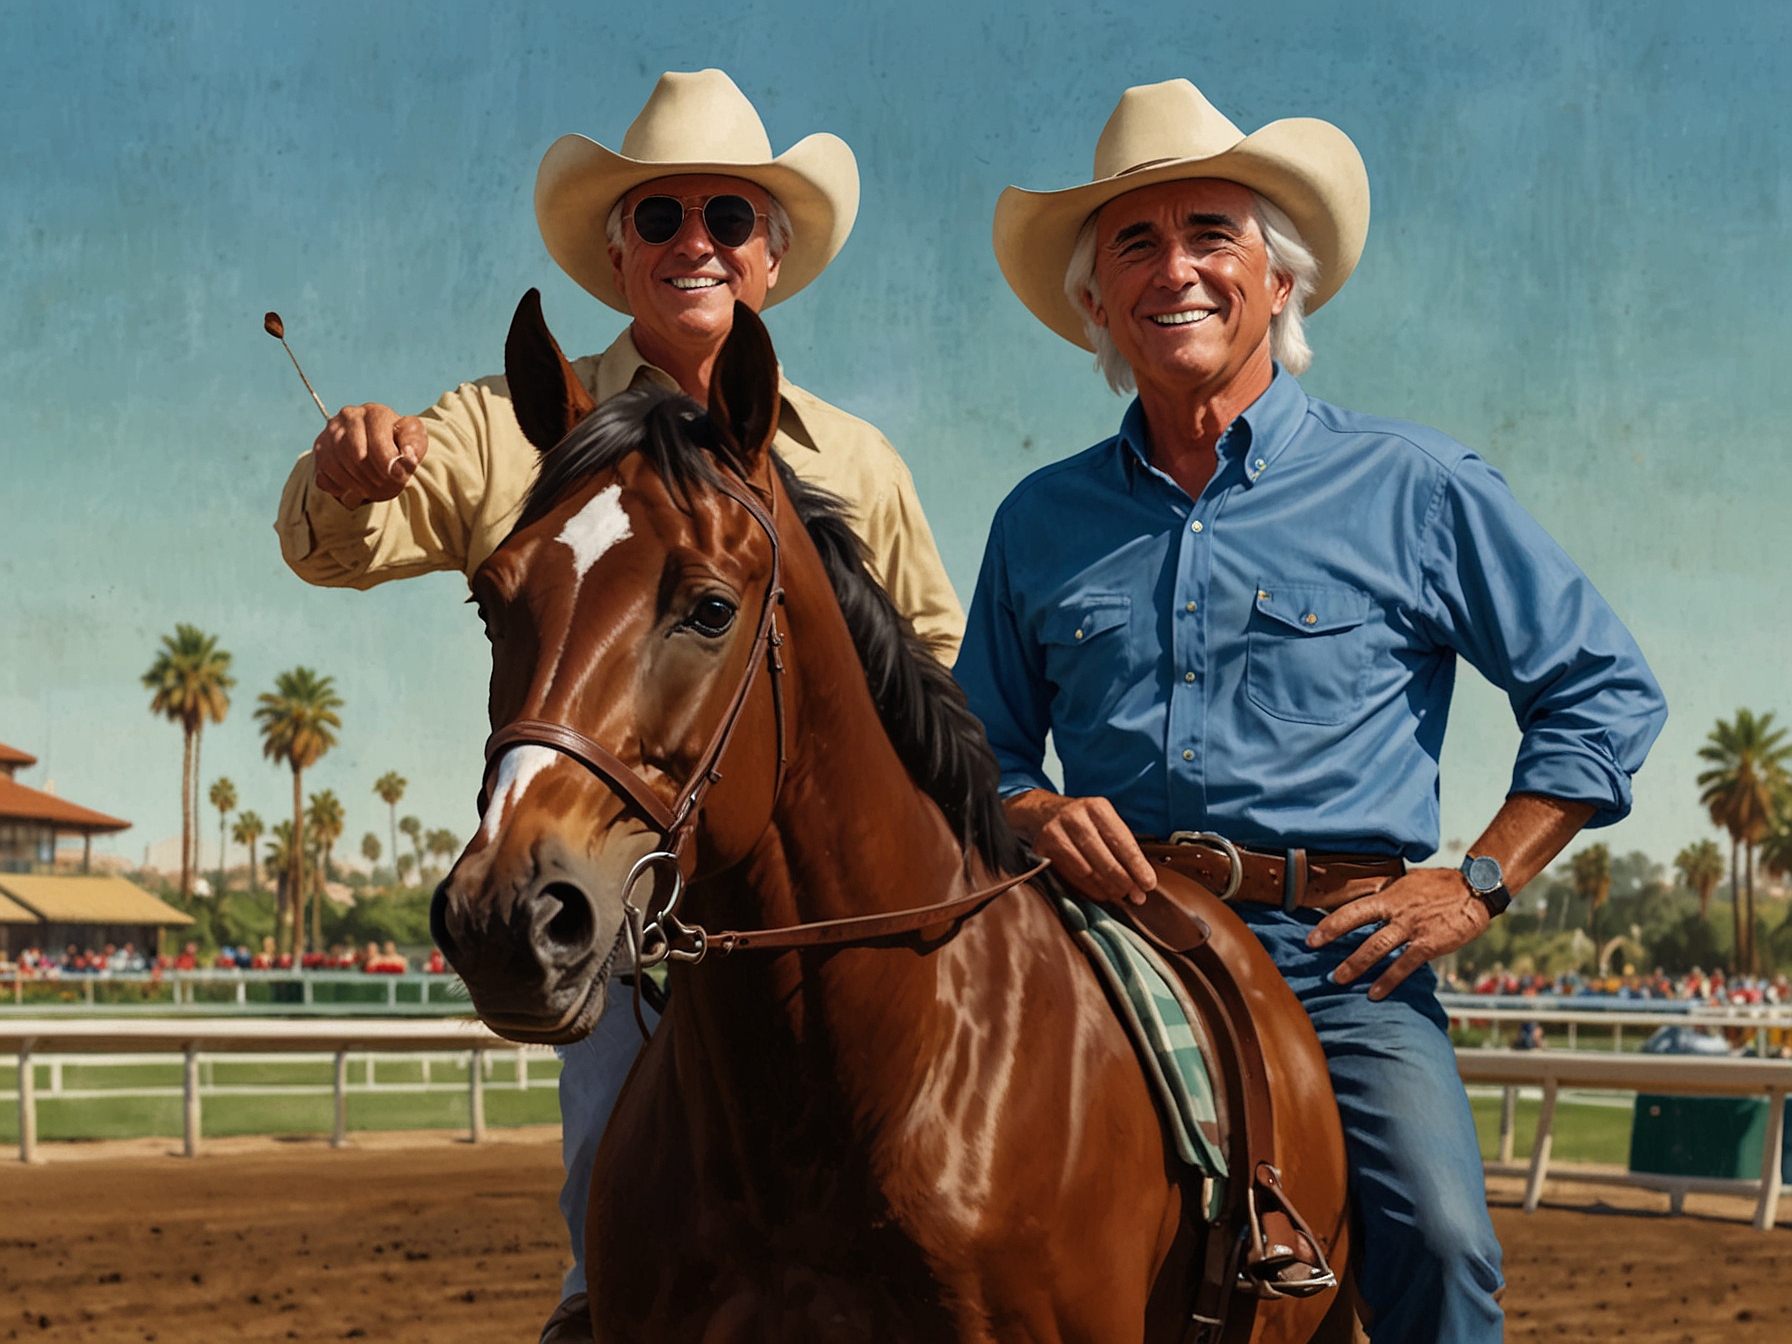 Bob Baffert stands proudly beside Cowboy Mike at the Los Alamitos track, the anticipation palpable as they prepare for the much-awaited Bertrando Stakes, showcasing their training and readiness.